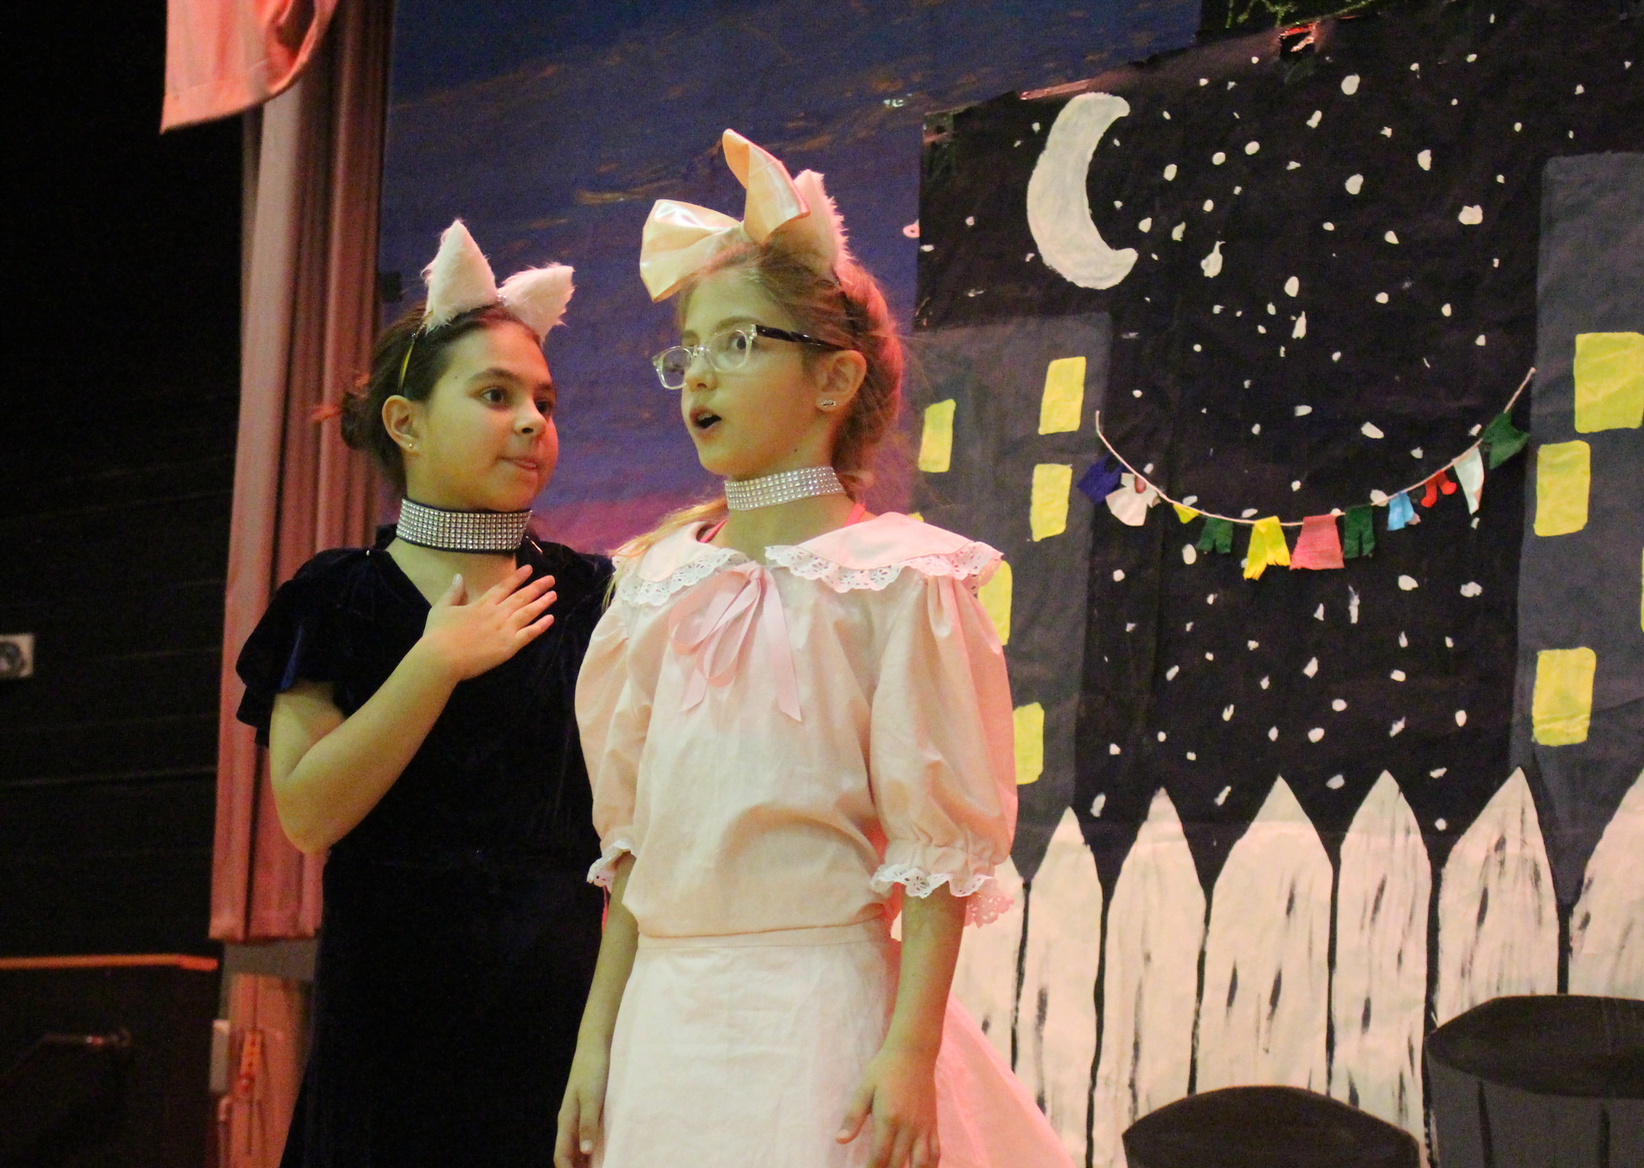 The cast and crew perfected their performance of The Aristocats during dress rehearsal on Nov 15, 2017